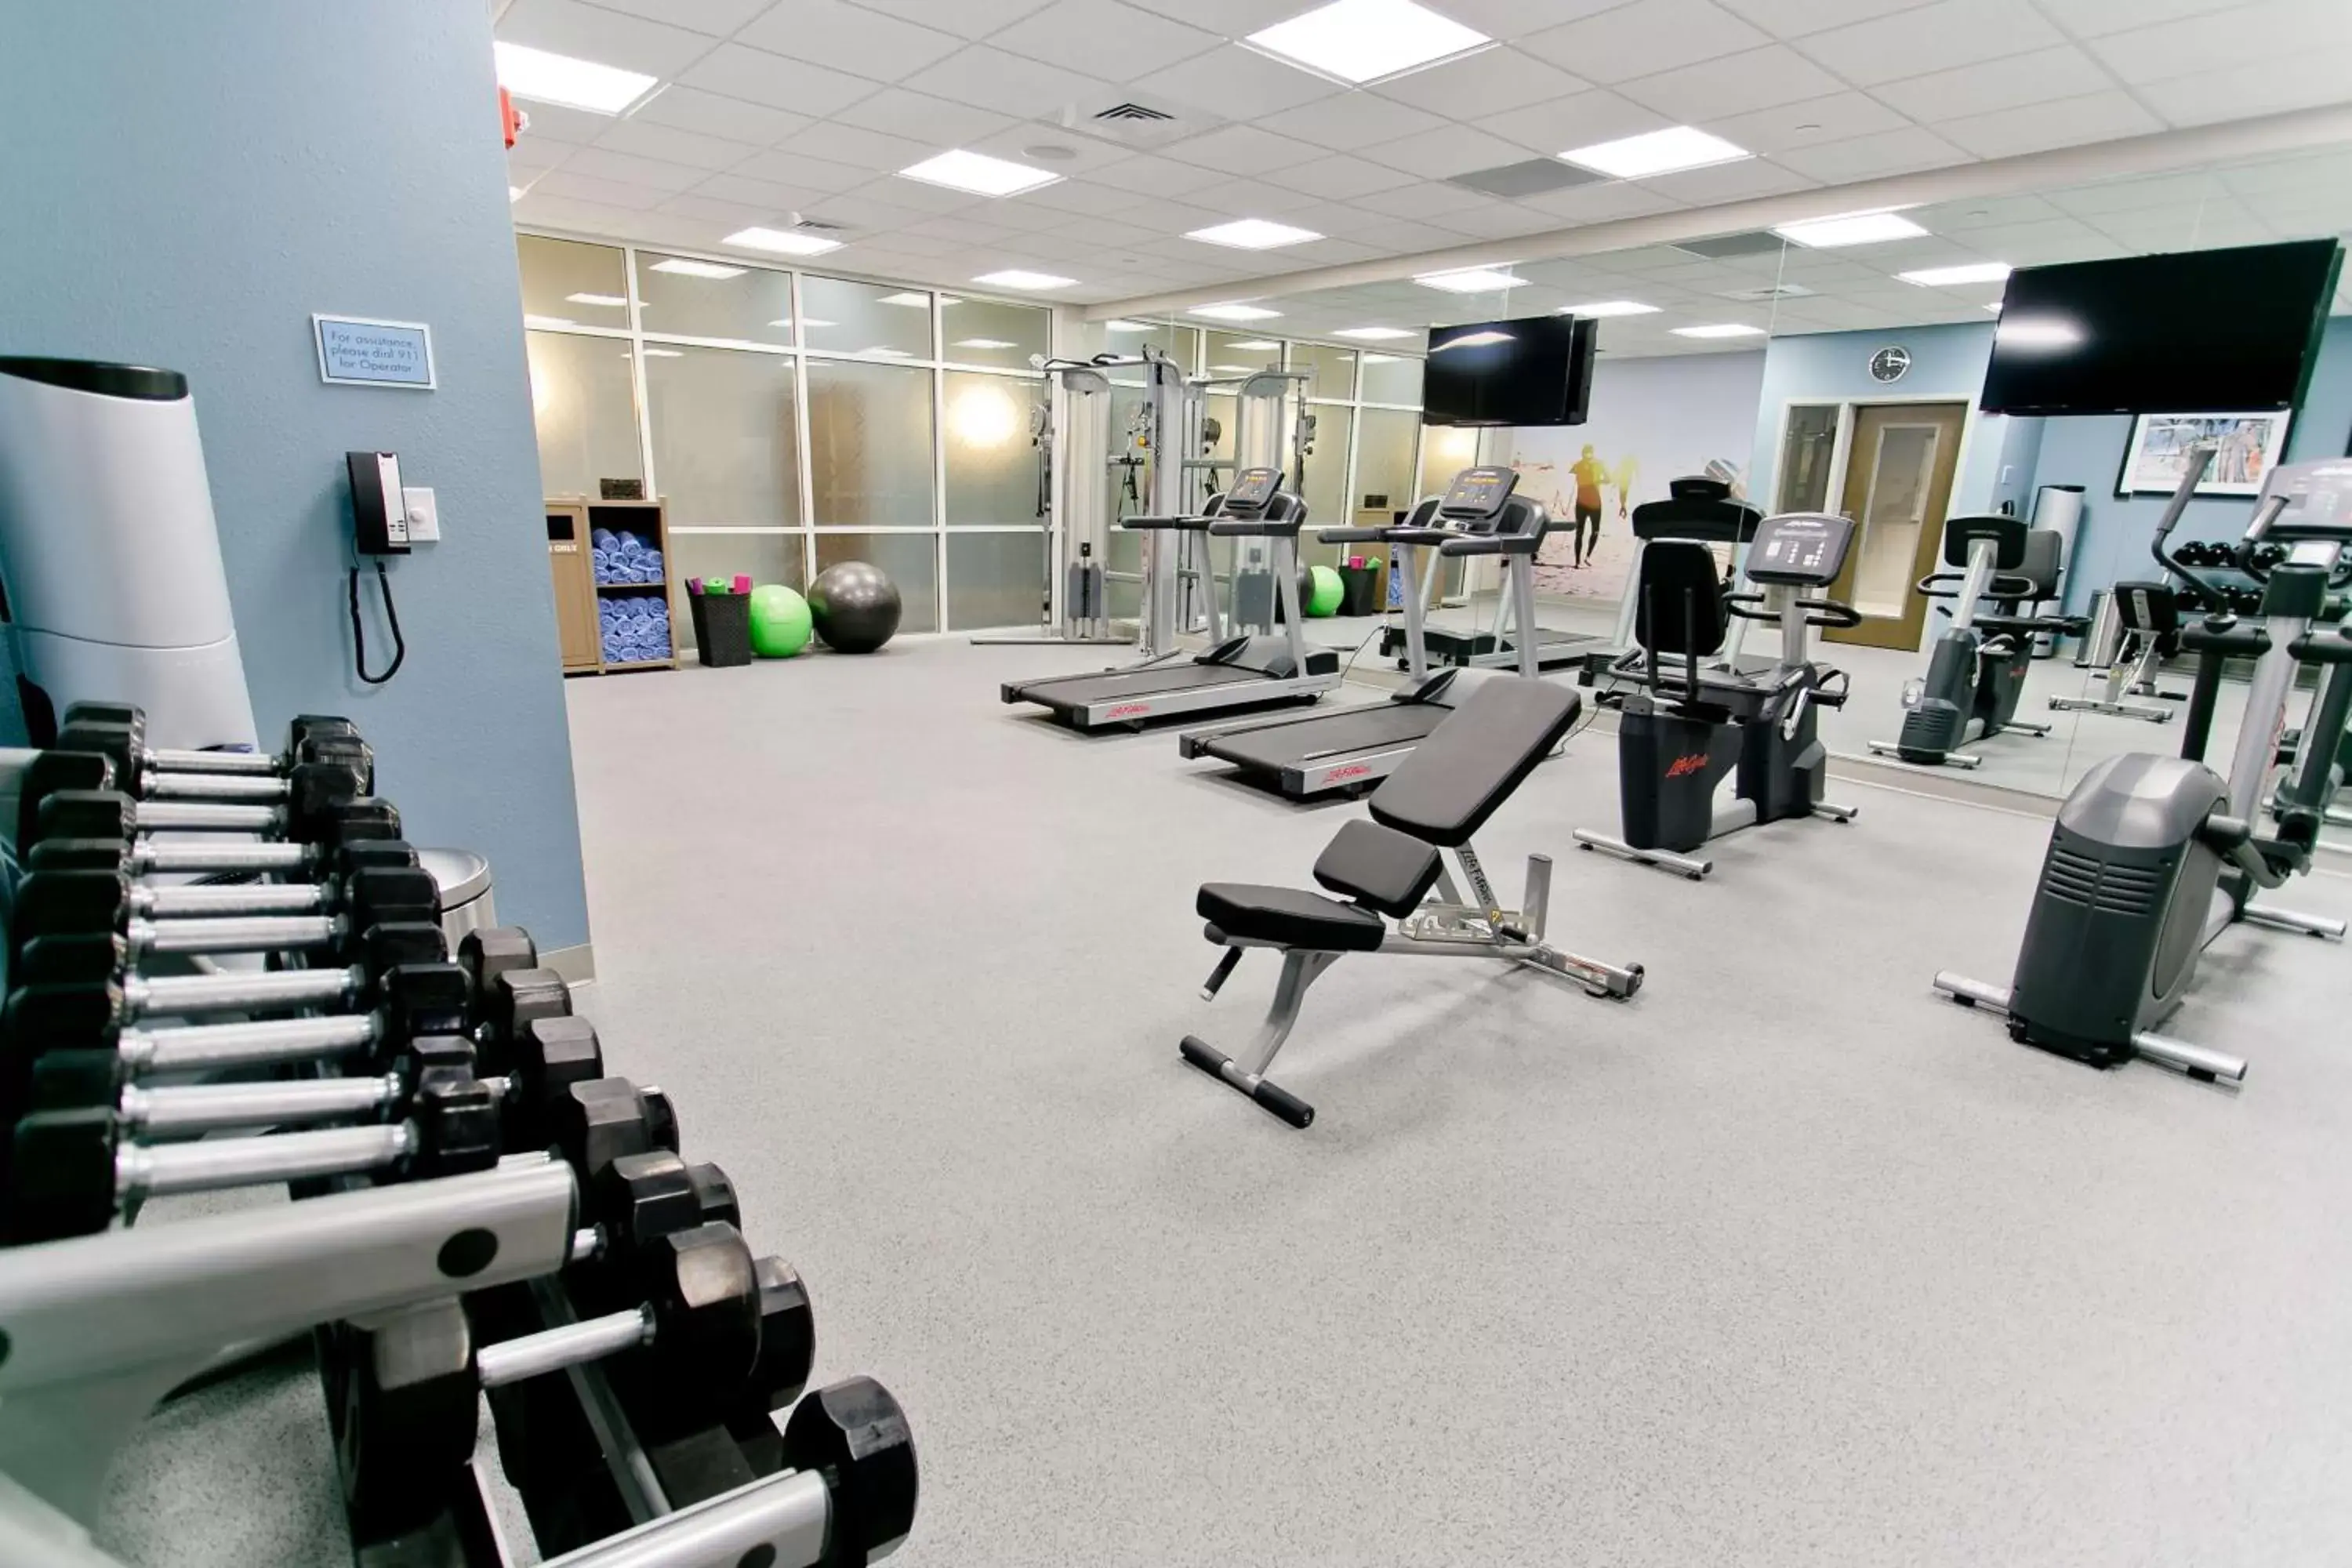 Fitness centre/facilities, Fitness Center/Facilities in Best Western Premier - The Tides